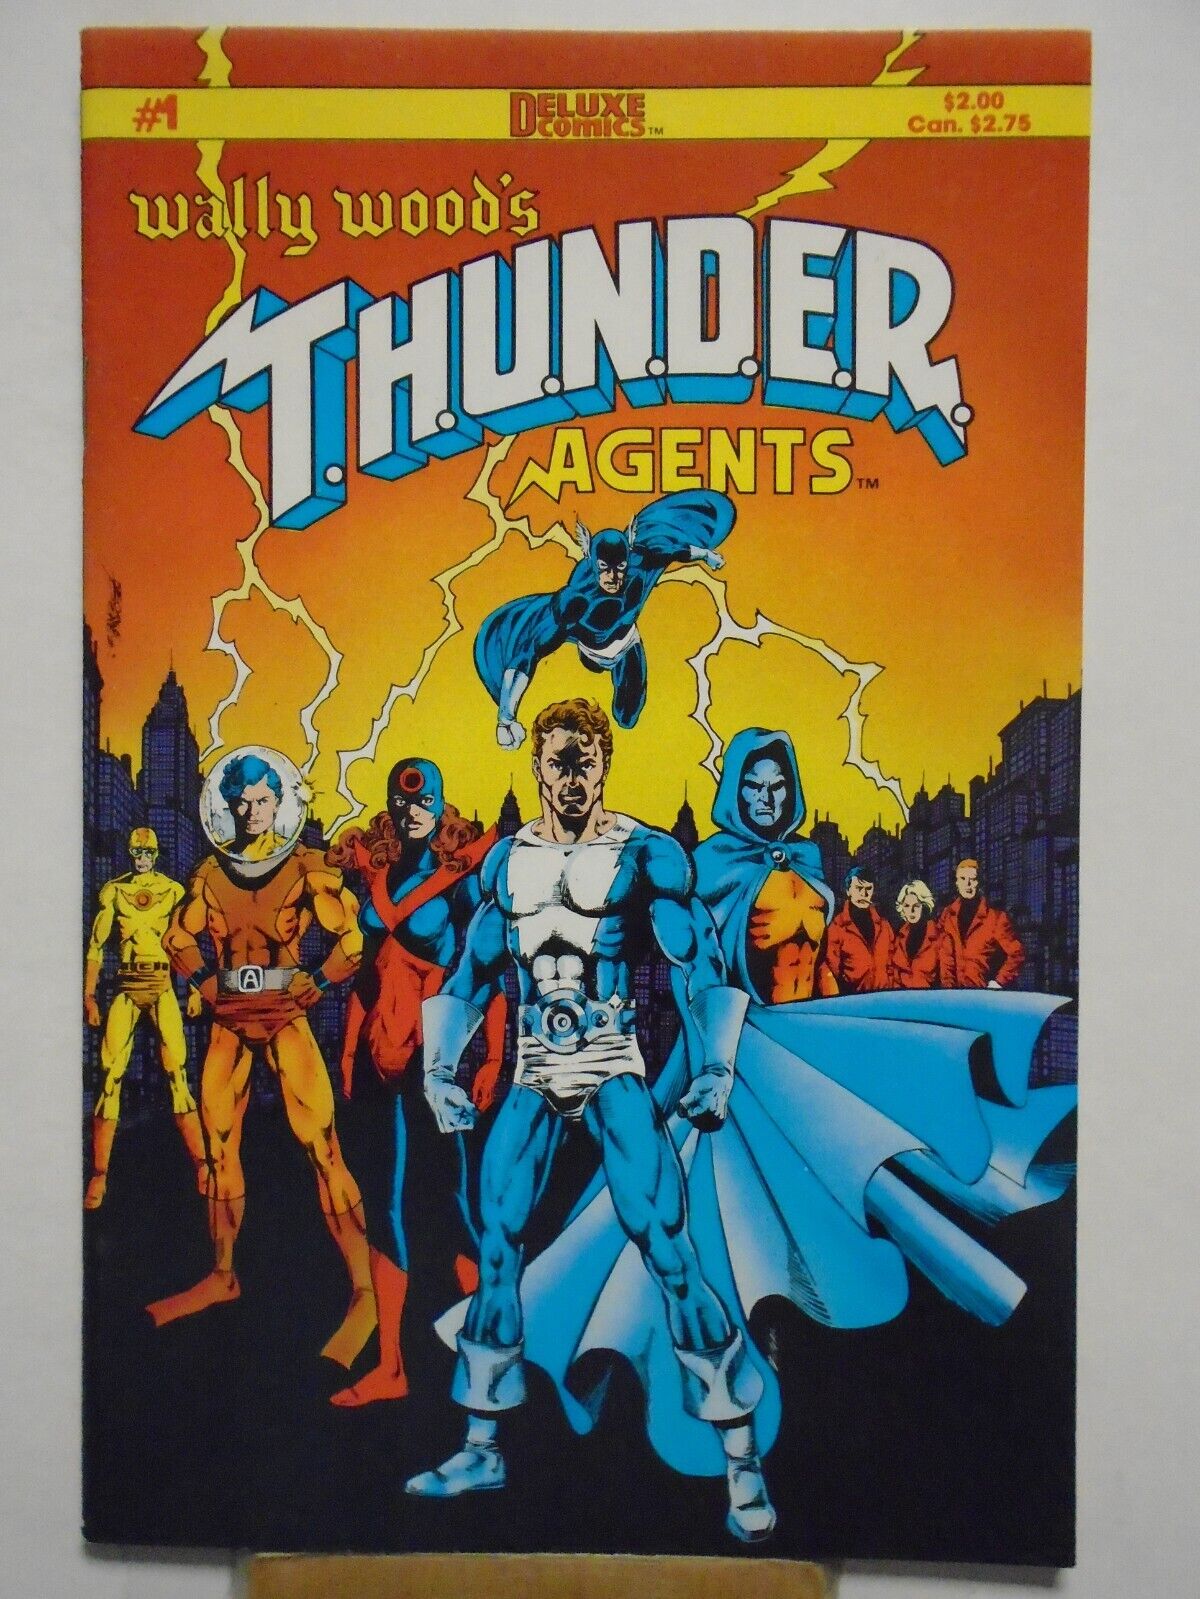 WALLY WOOD'S THUNDER AGENTS #1 (1984) Dynamo, Egghead, George Perez, Deluxe